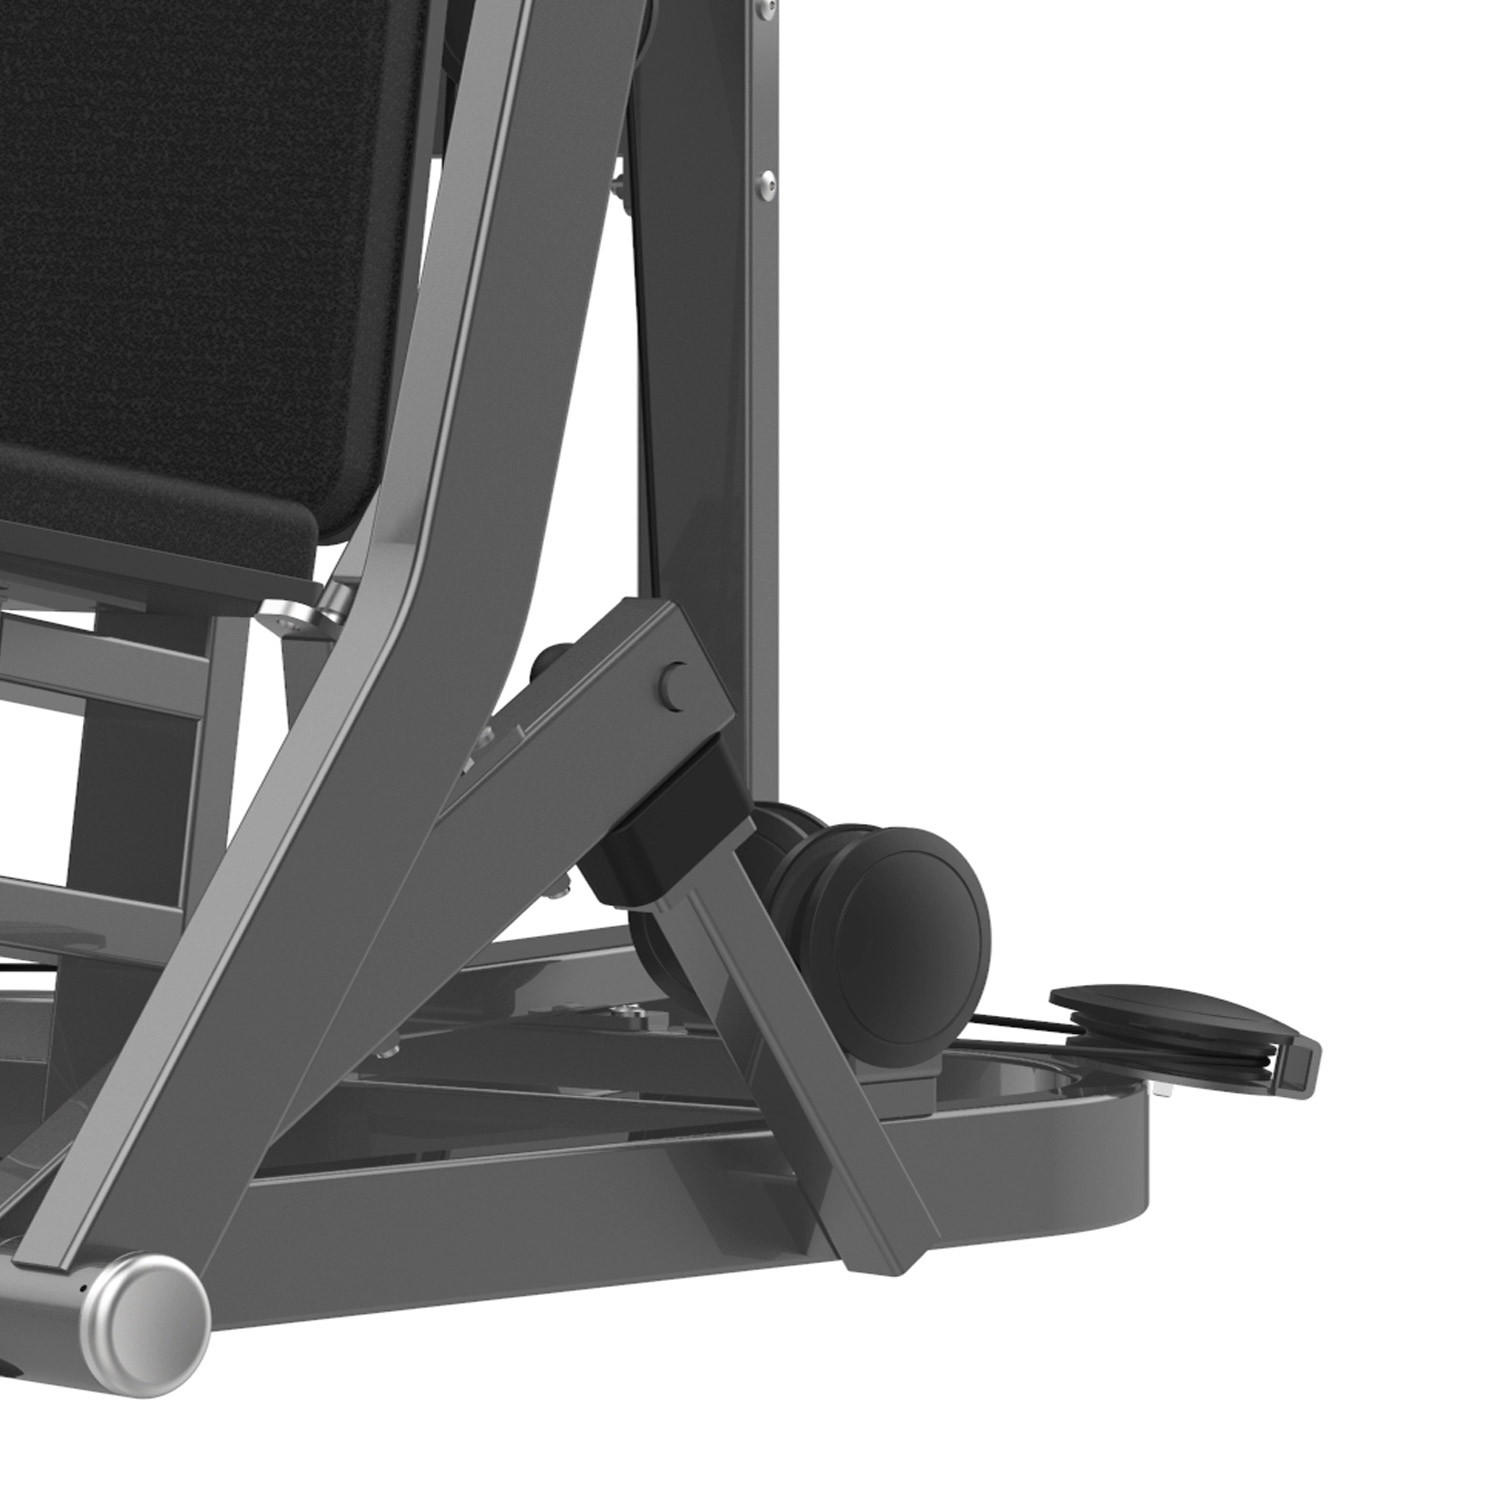 8 low impact exercise equipment you can get today